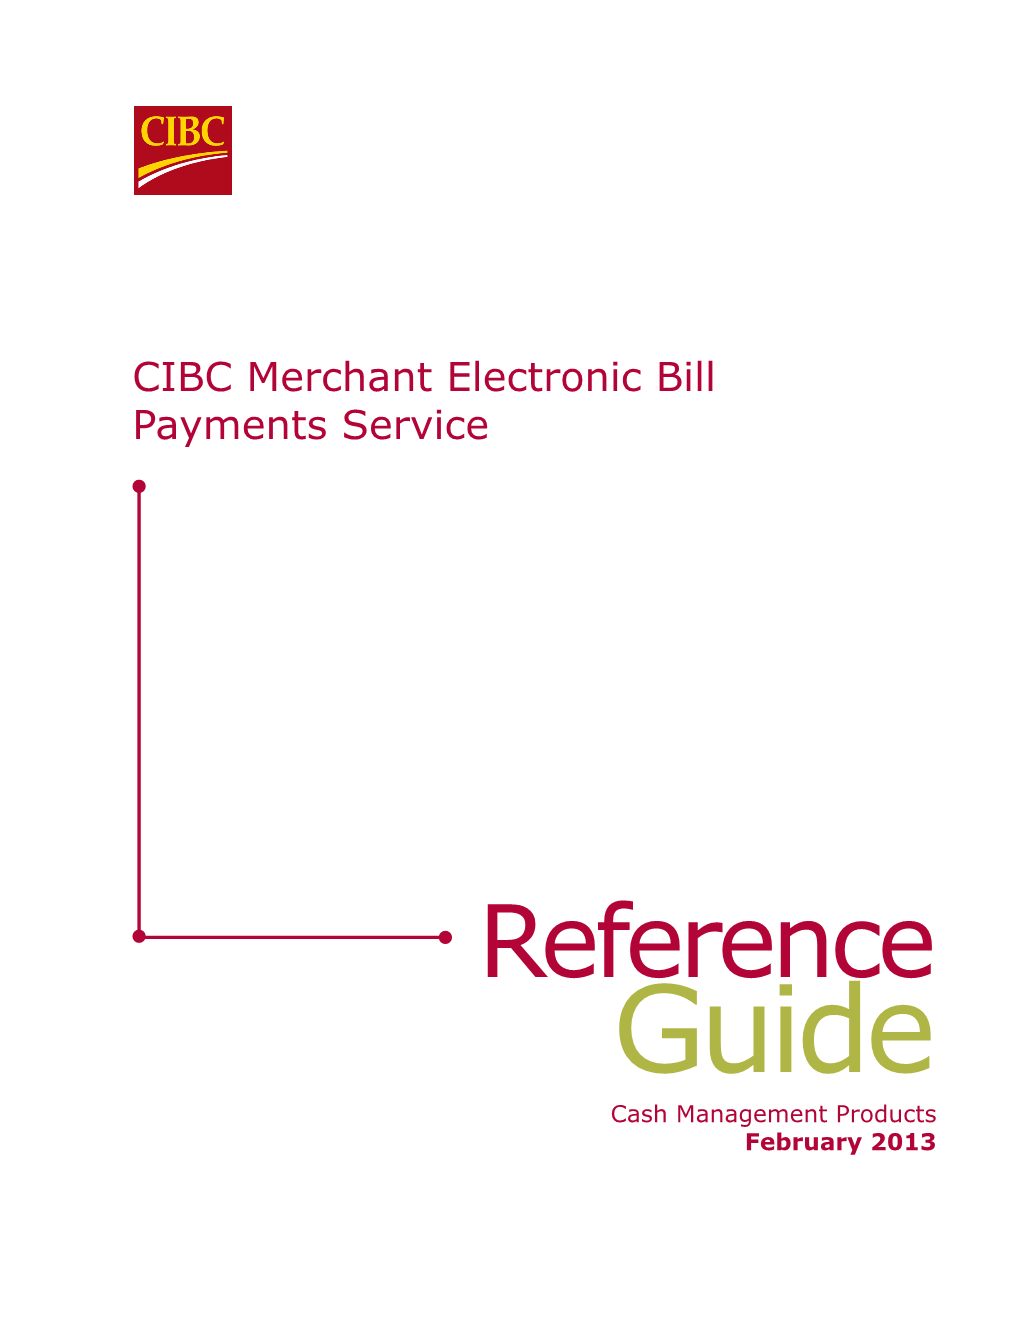 Reference Guide Cash Management Products February 2013 Introduction